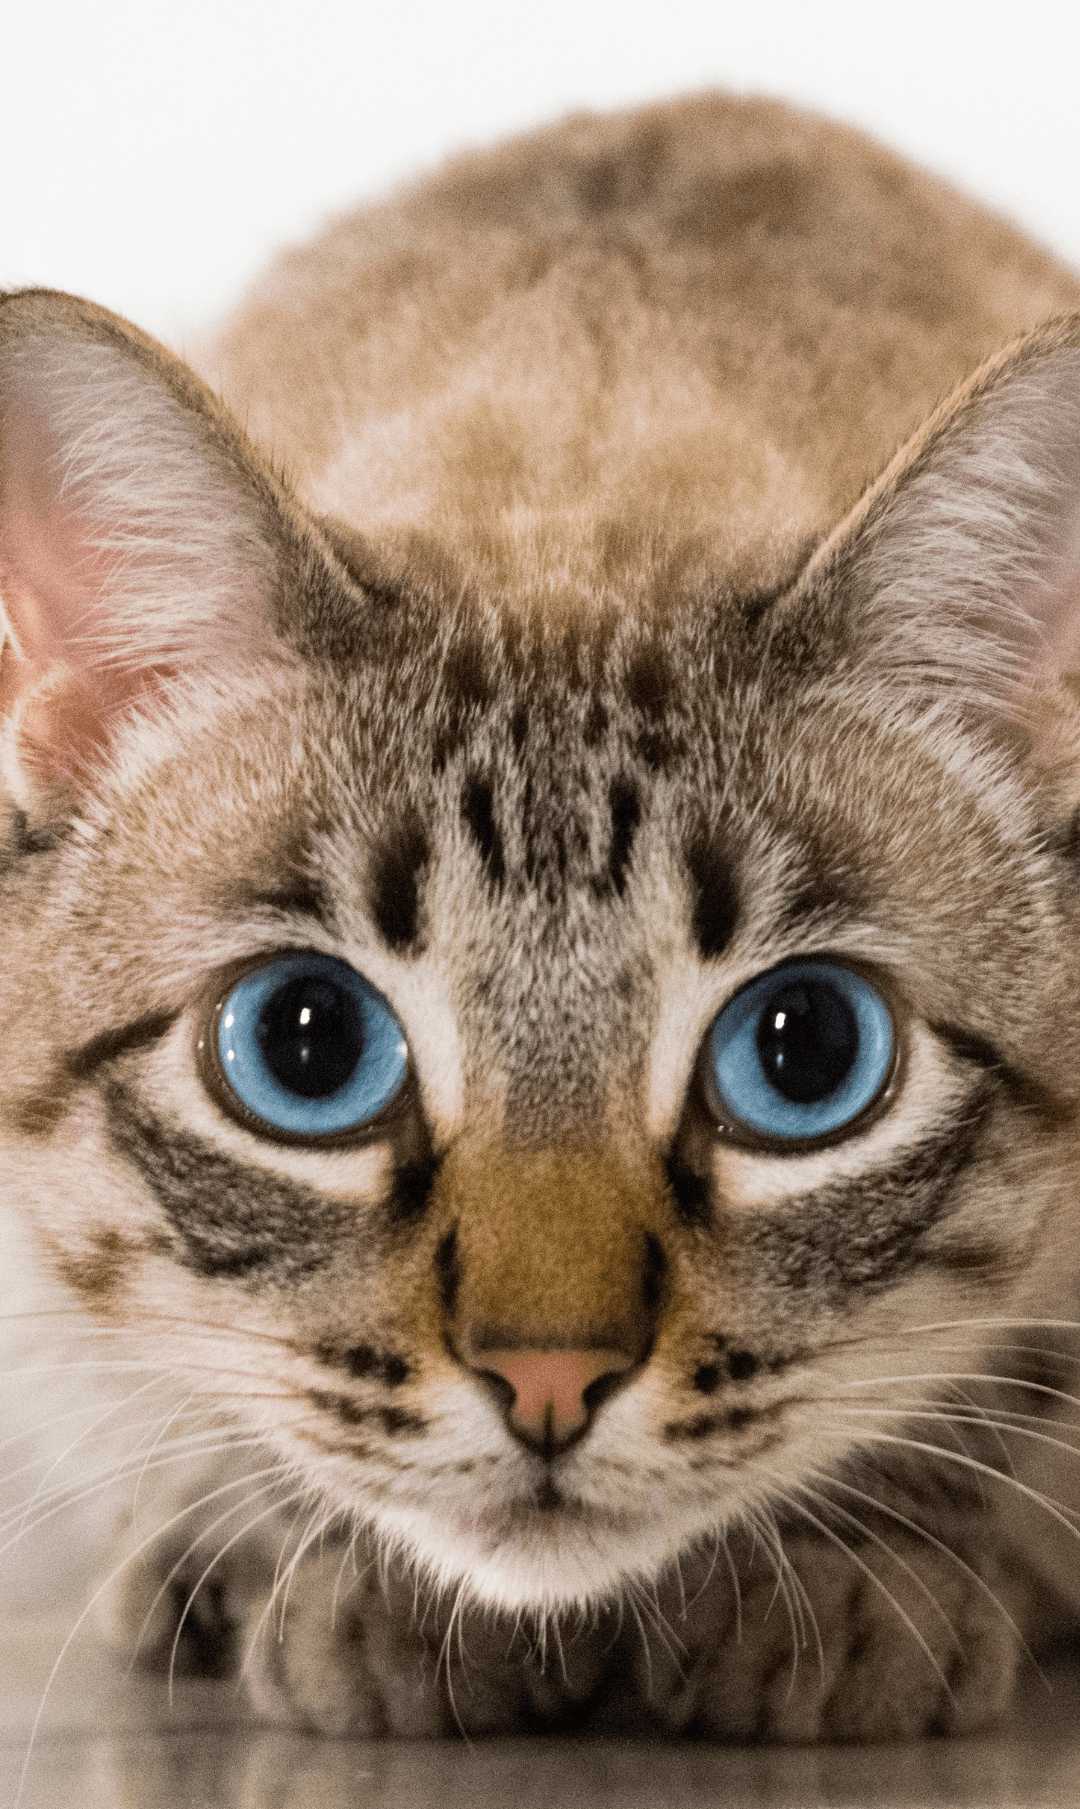 Cat with blue eyes laying down